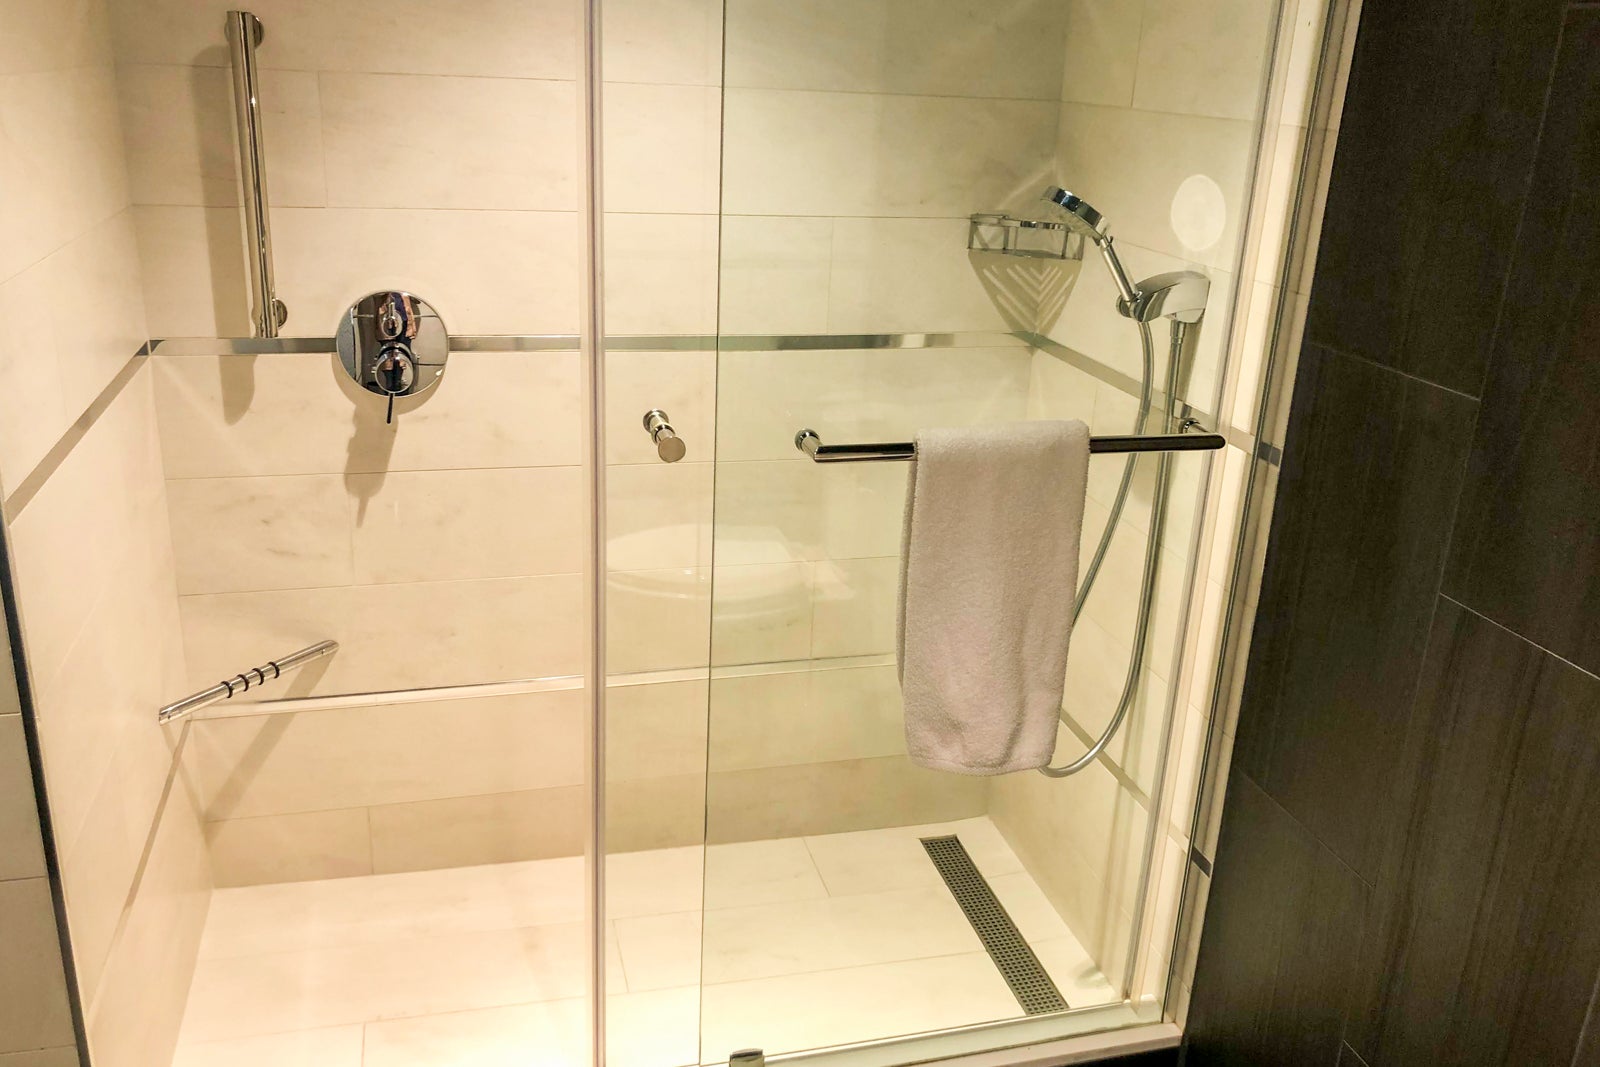 Photo of the shower at The Clancy hotel.